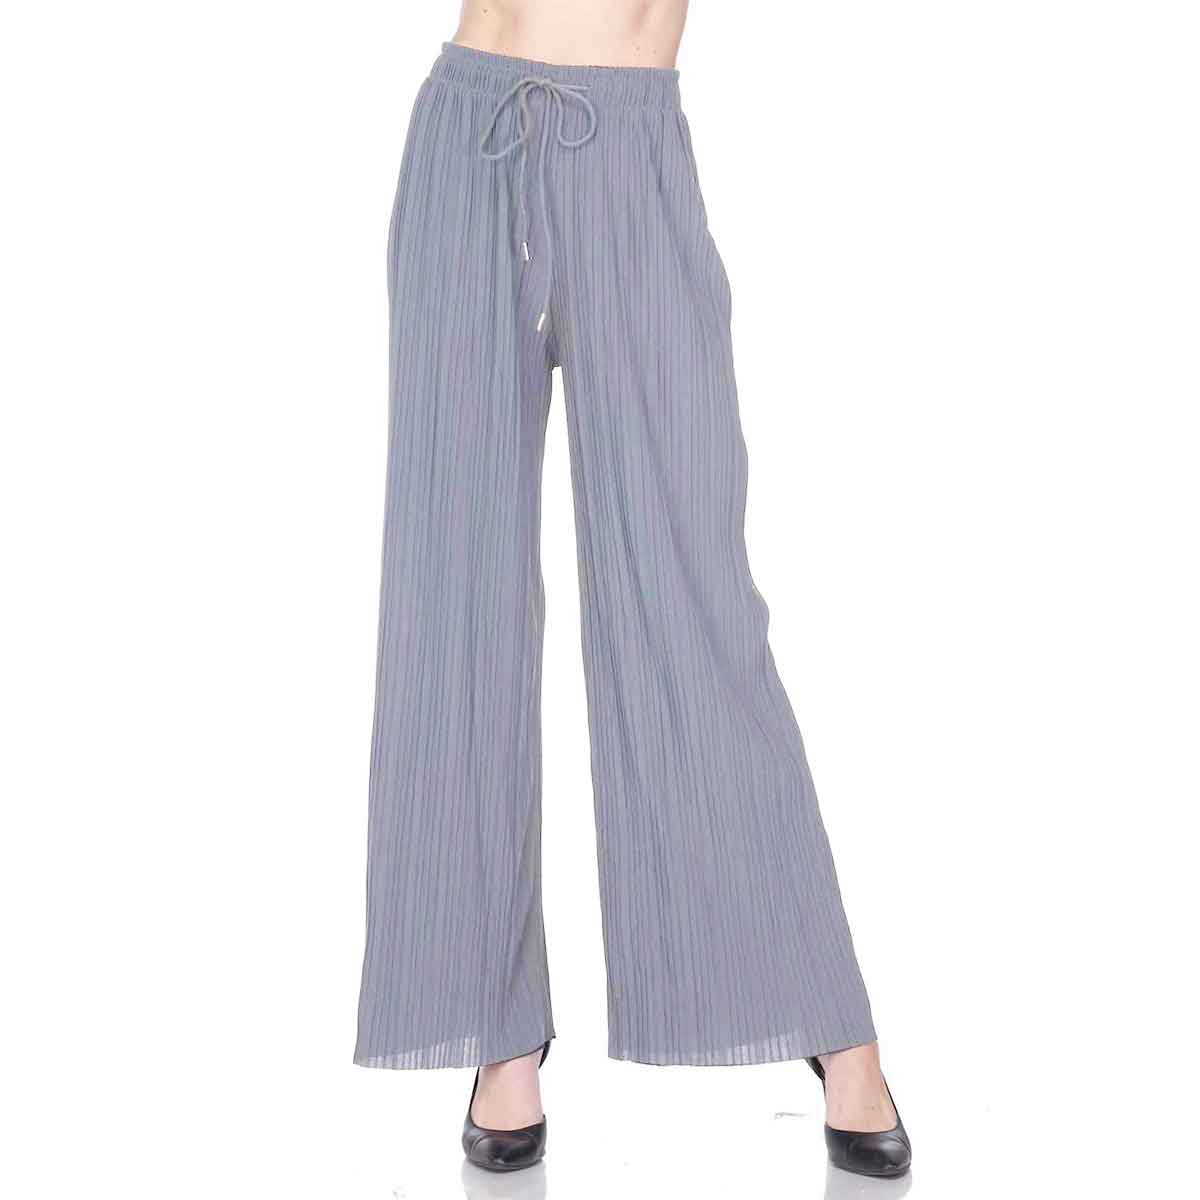 Silver<br>
Stretch Twill Pleated Wide Leg Pants